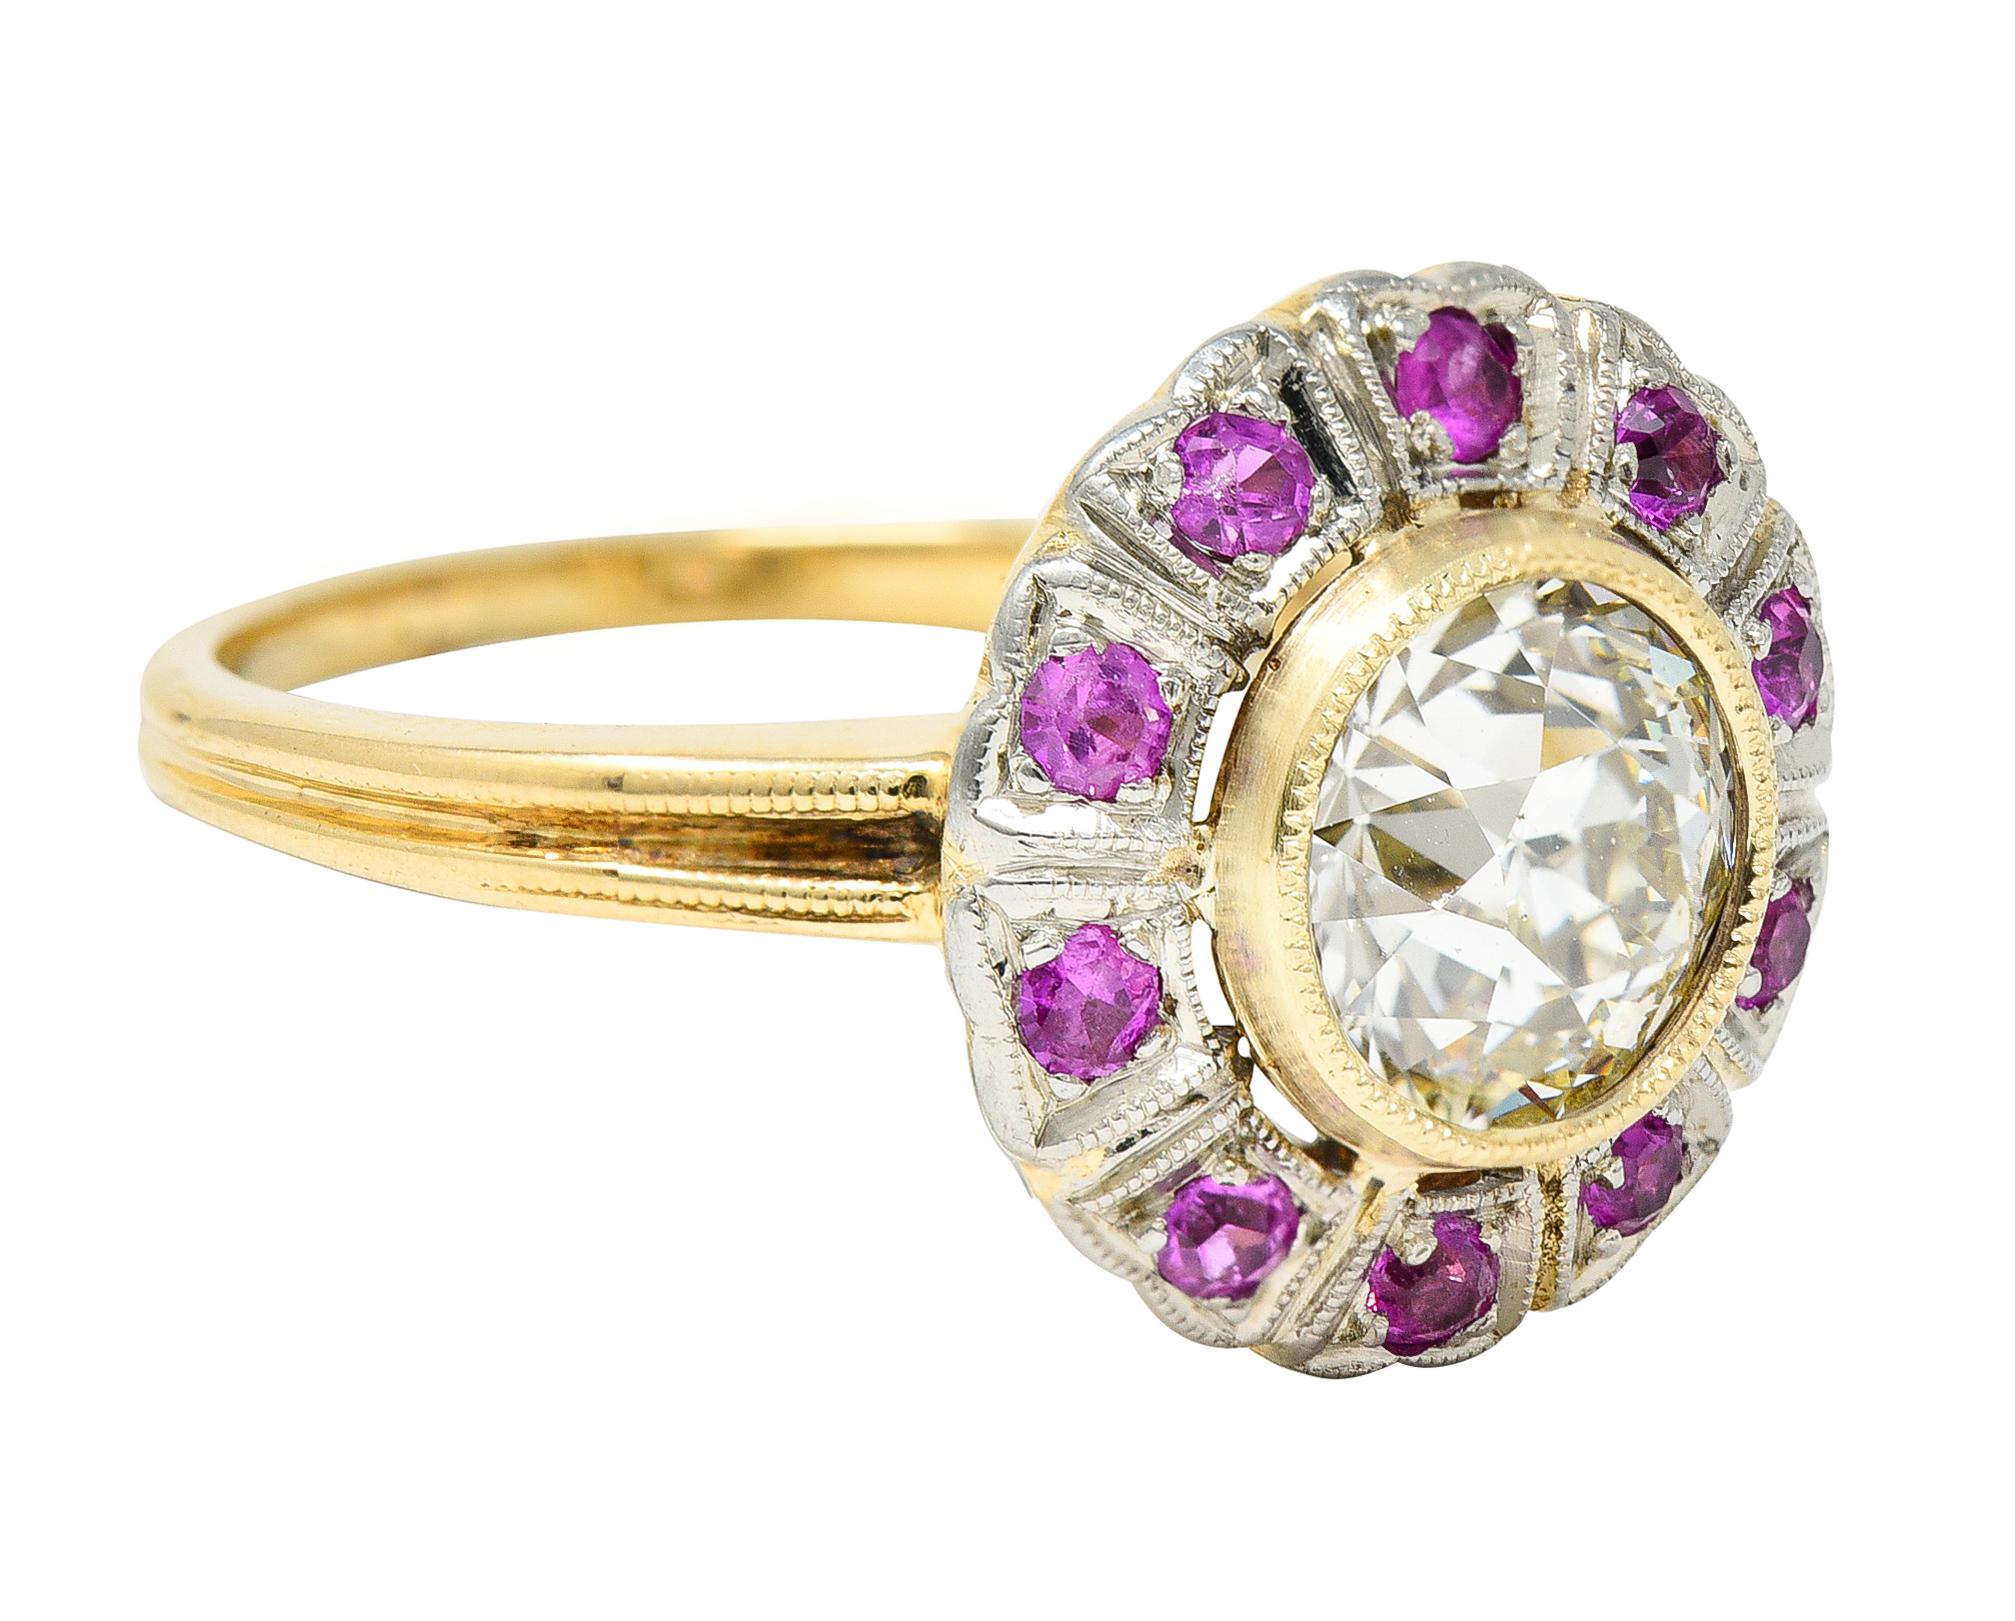 Centering an old European cut diamond weighing 1.14 carats total - M color with VS1 clarity. Set in a raised gold bezel with a platinum-topped surround featuring a halo of round cut rubies. Bead set and weighing approximately 0.35 carat total -